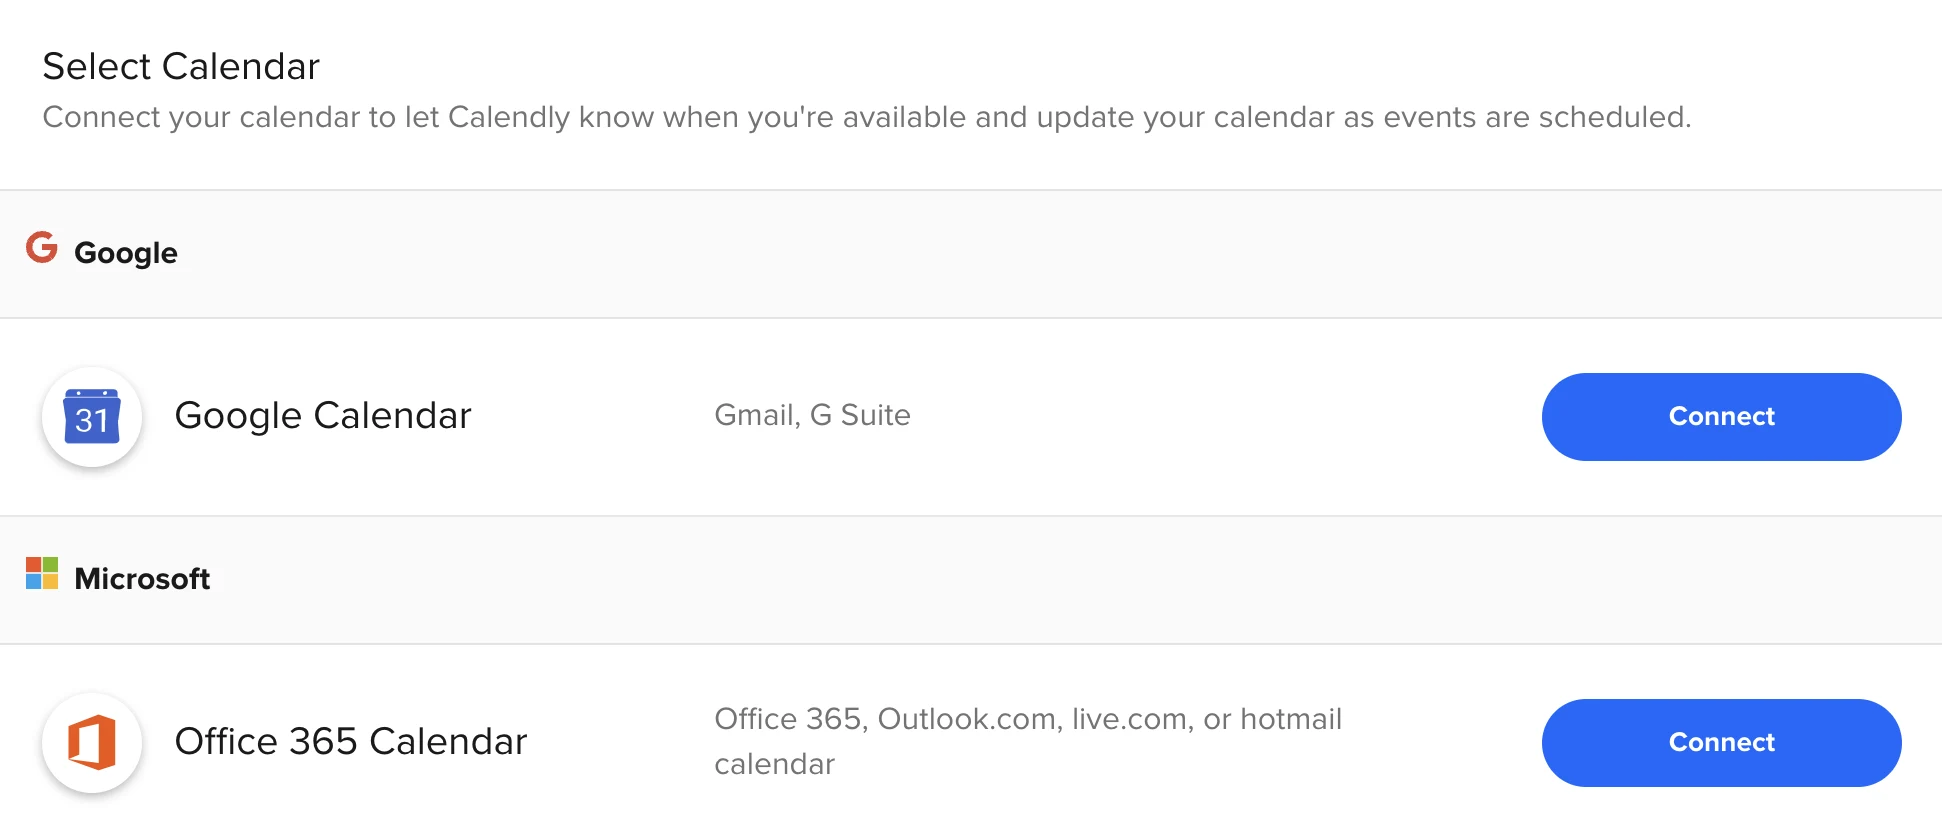 Screenshot of the Calendar Connections page in the Calendly app with the option to connect a Google Calendar and Office 365 Calendar